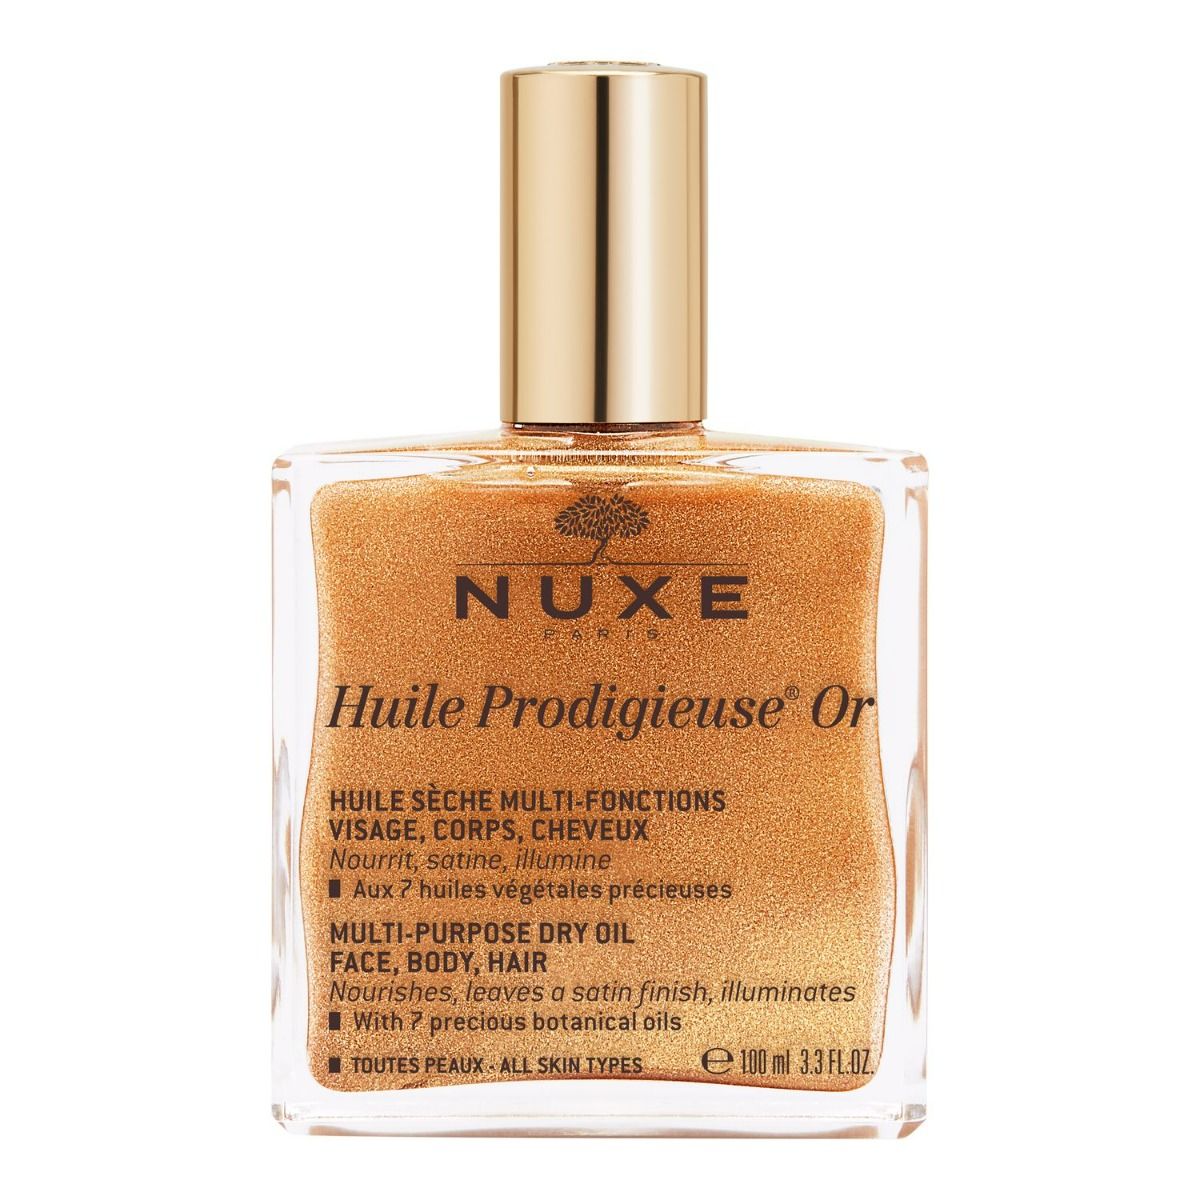 Nuxe Huile Prodigieuse Or масло для лица, тела и волос, 100 ml nuxe масло huile prodigieuse florale цветочное сухое 50 мл